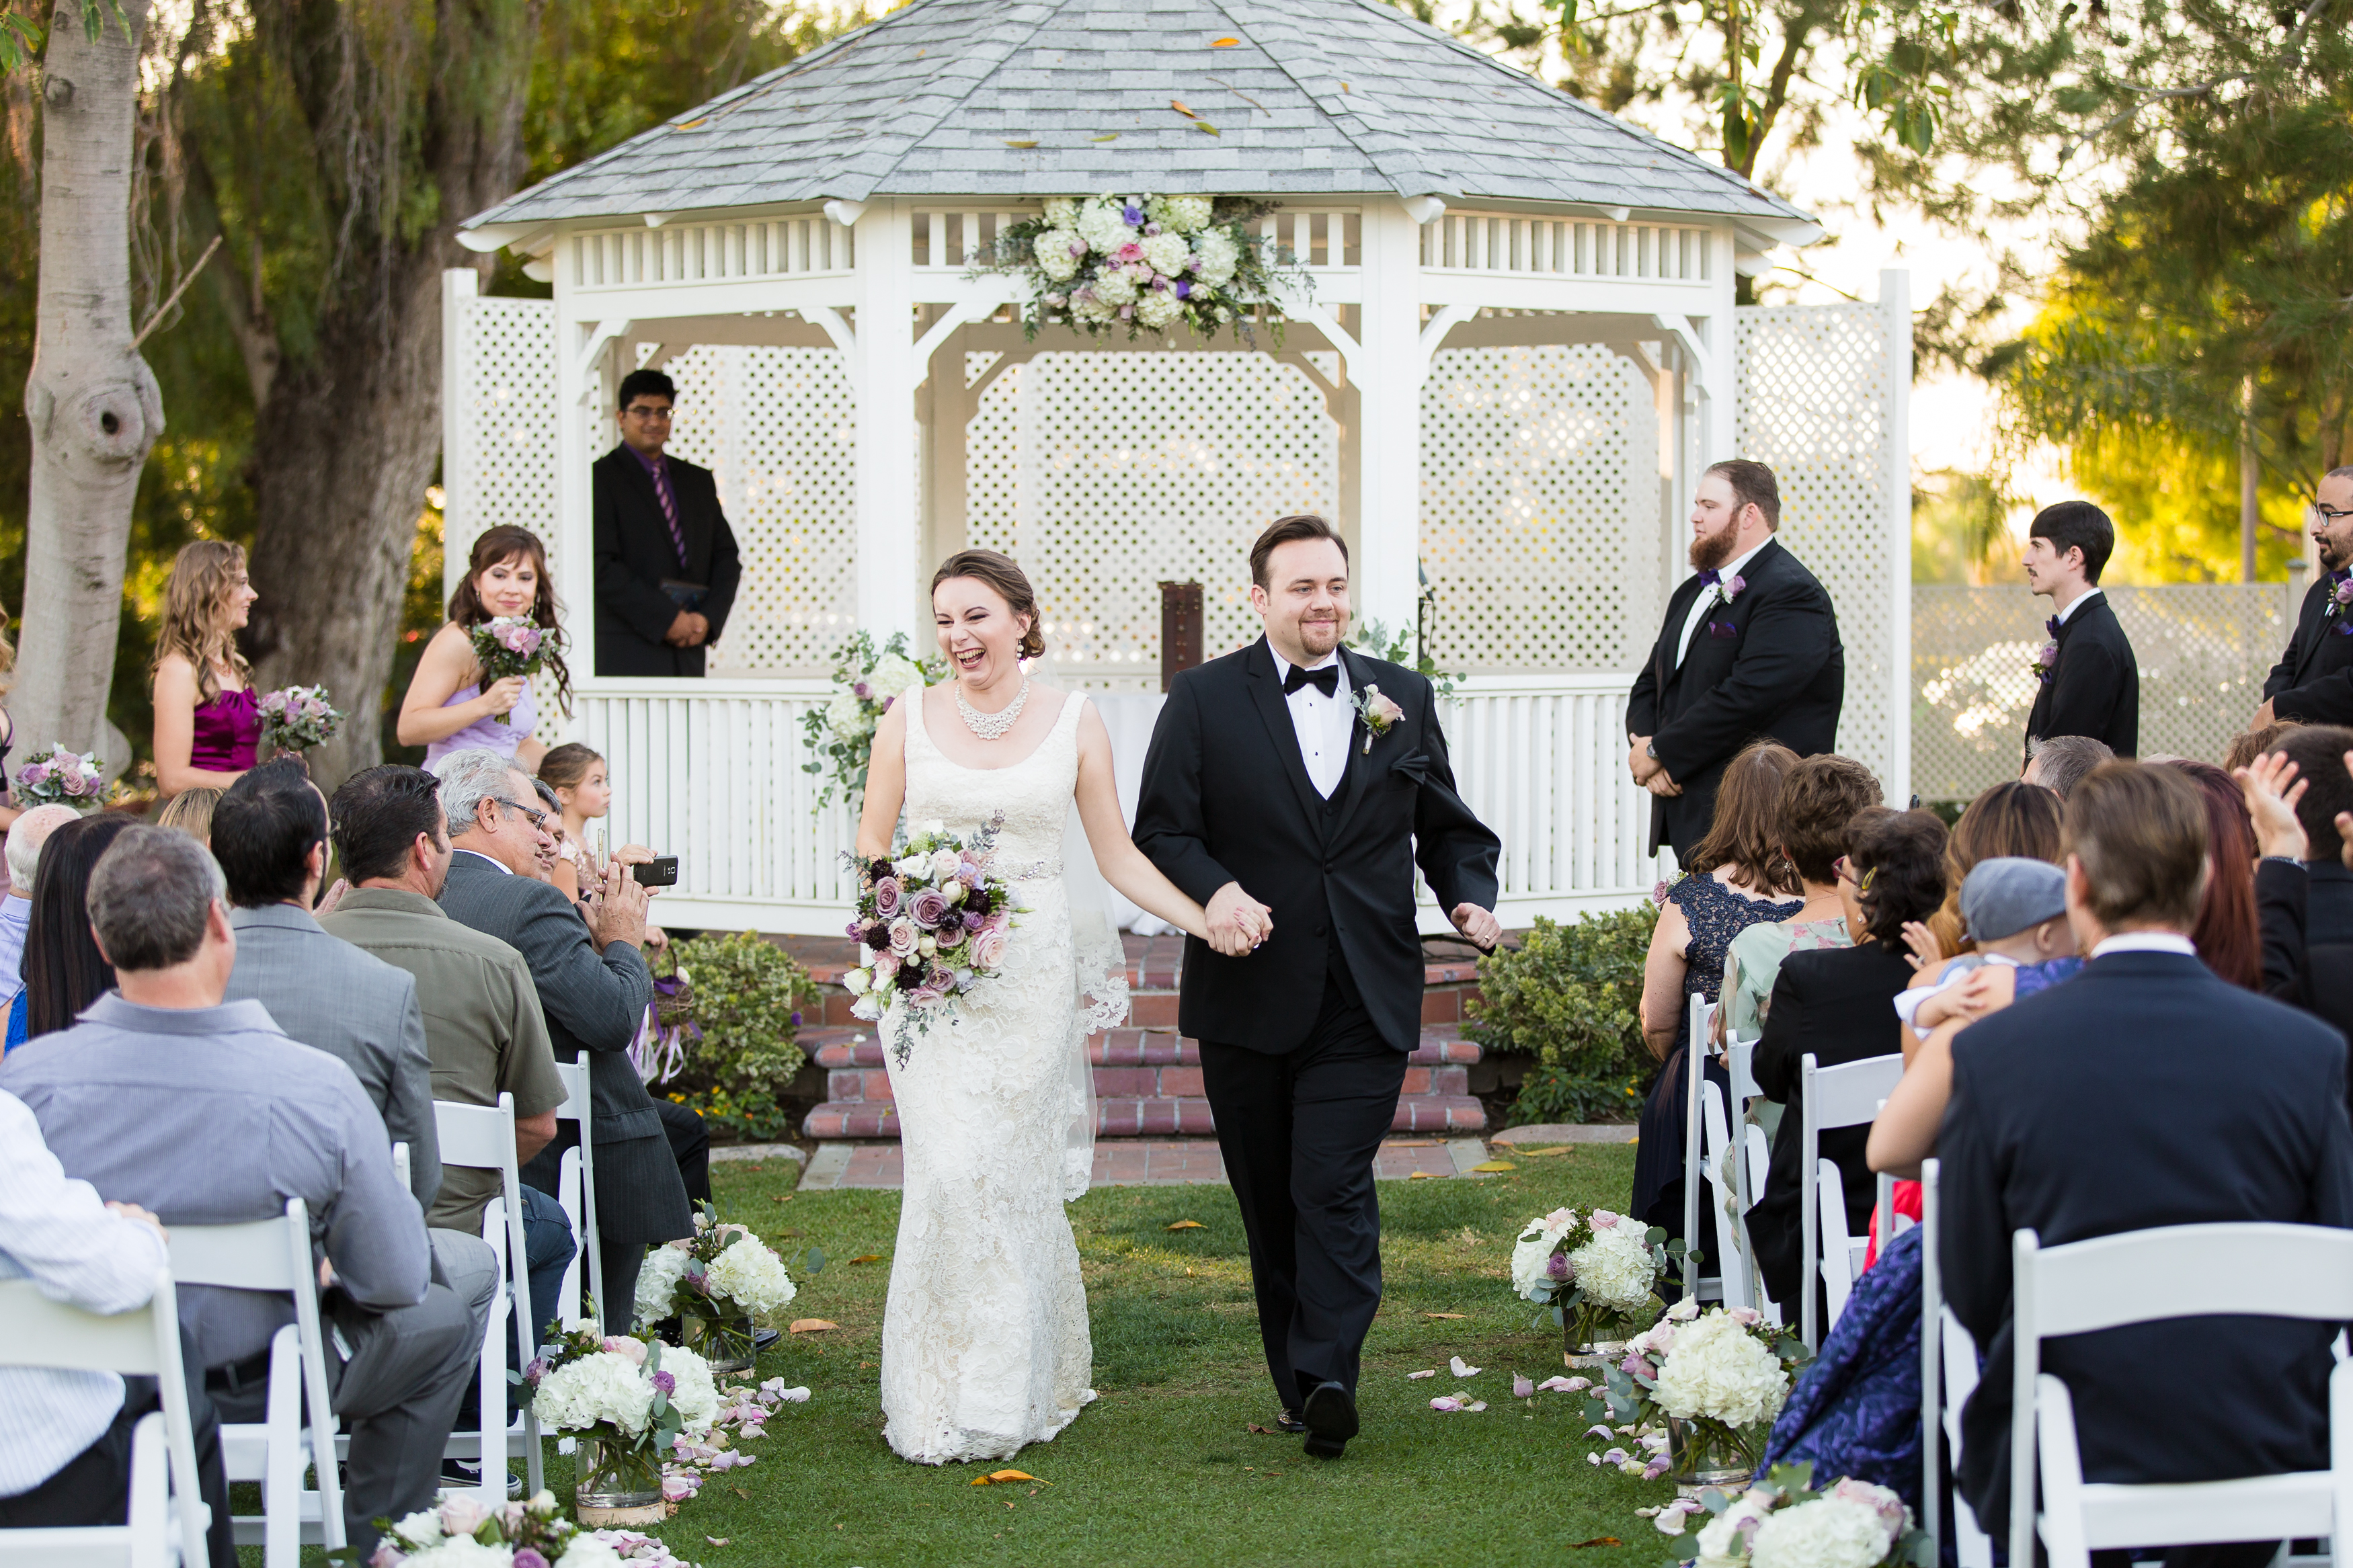 Couple walking down the aisle after Alta Vista Country Club wedding ceremony